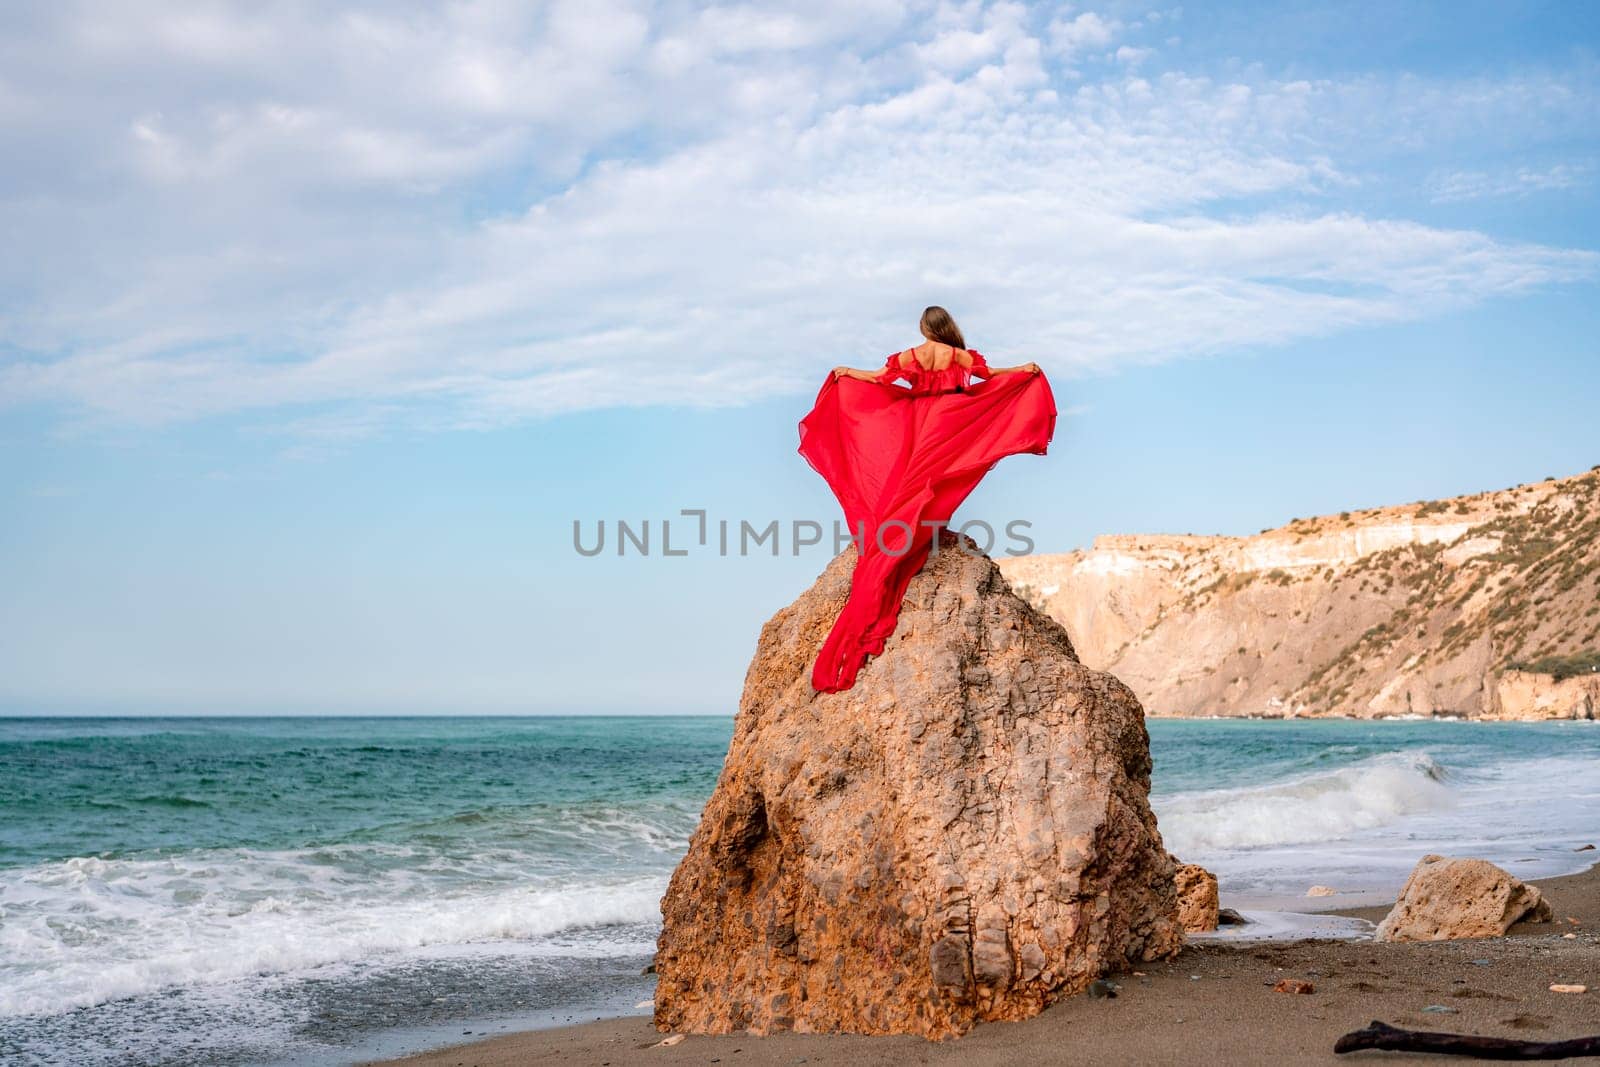 woman sea red dress. Woman with long hair on a sunny seashore in a red flowing dress, back view, silk fabric waving in the wind. Against the backdrop of the blue sky and mountains on the seashore. by Matiunina